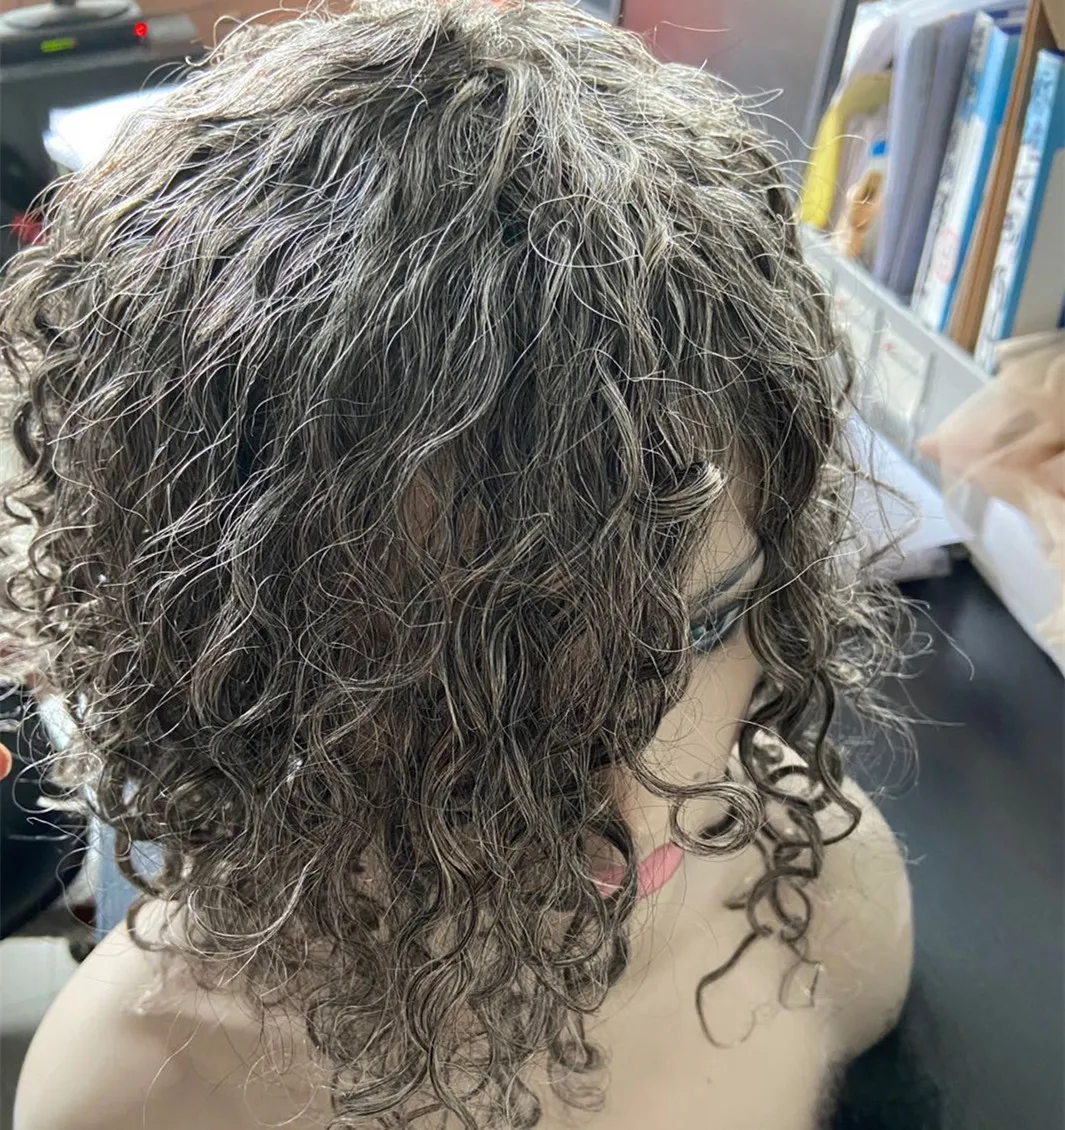 Salt And Pepper Short Curly Gray closure lace Wigs 4x4 hd bob, Sassy Pixie Cut Human Hair Wig With Bangs, Indian Remy Kinky Curly Hair Wig Mixed Black And Grey 14day custom